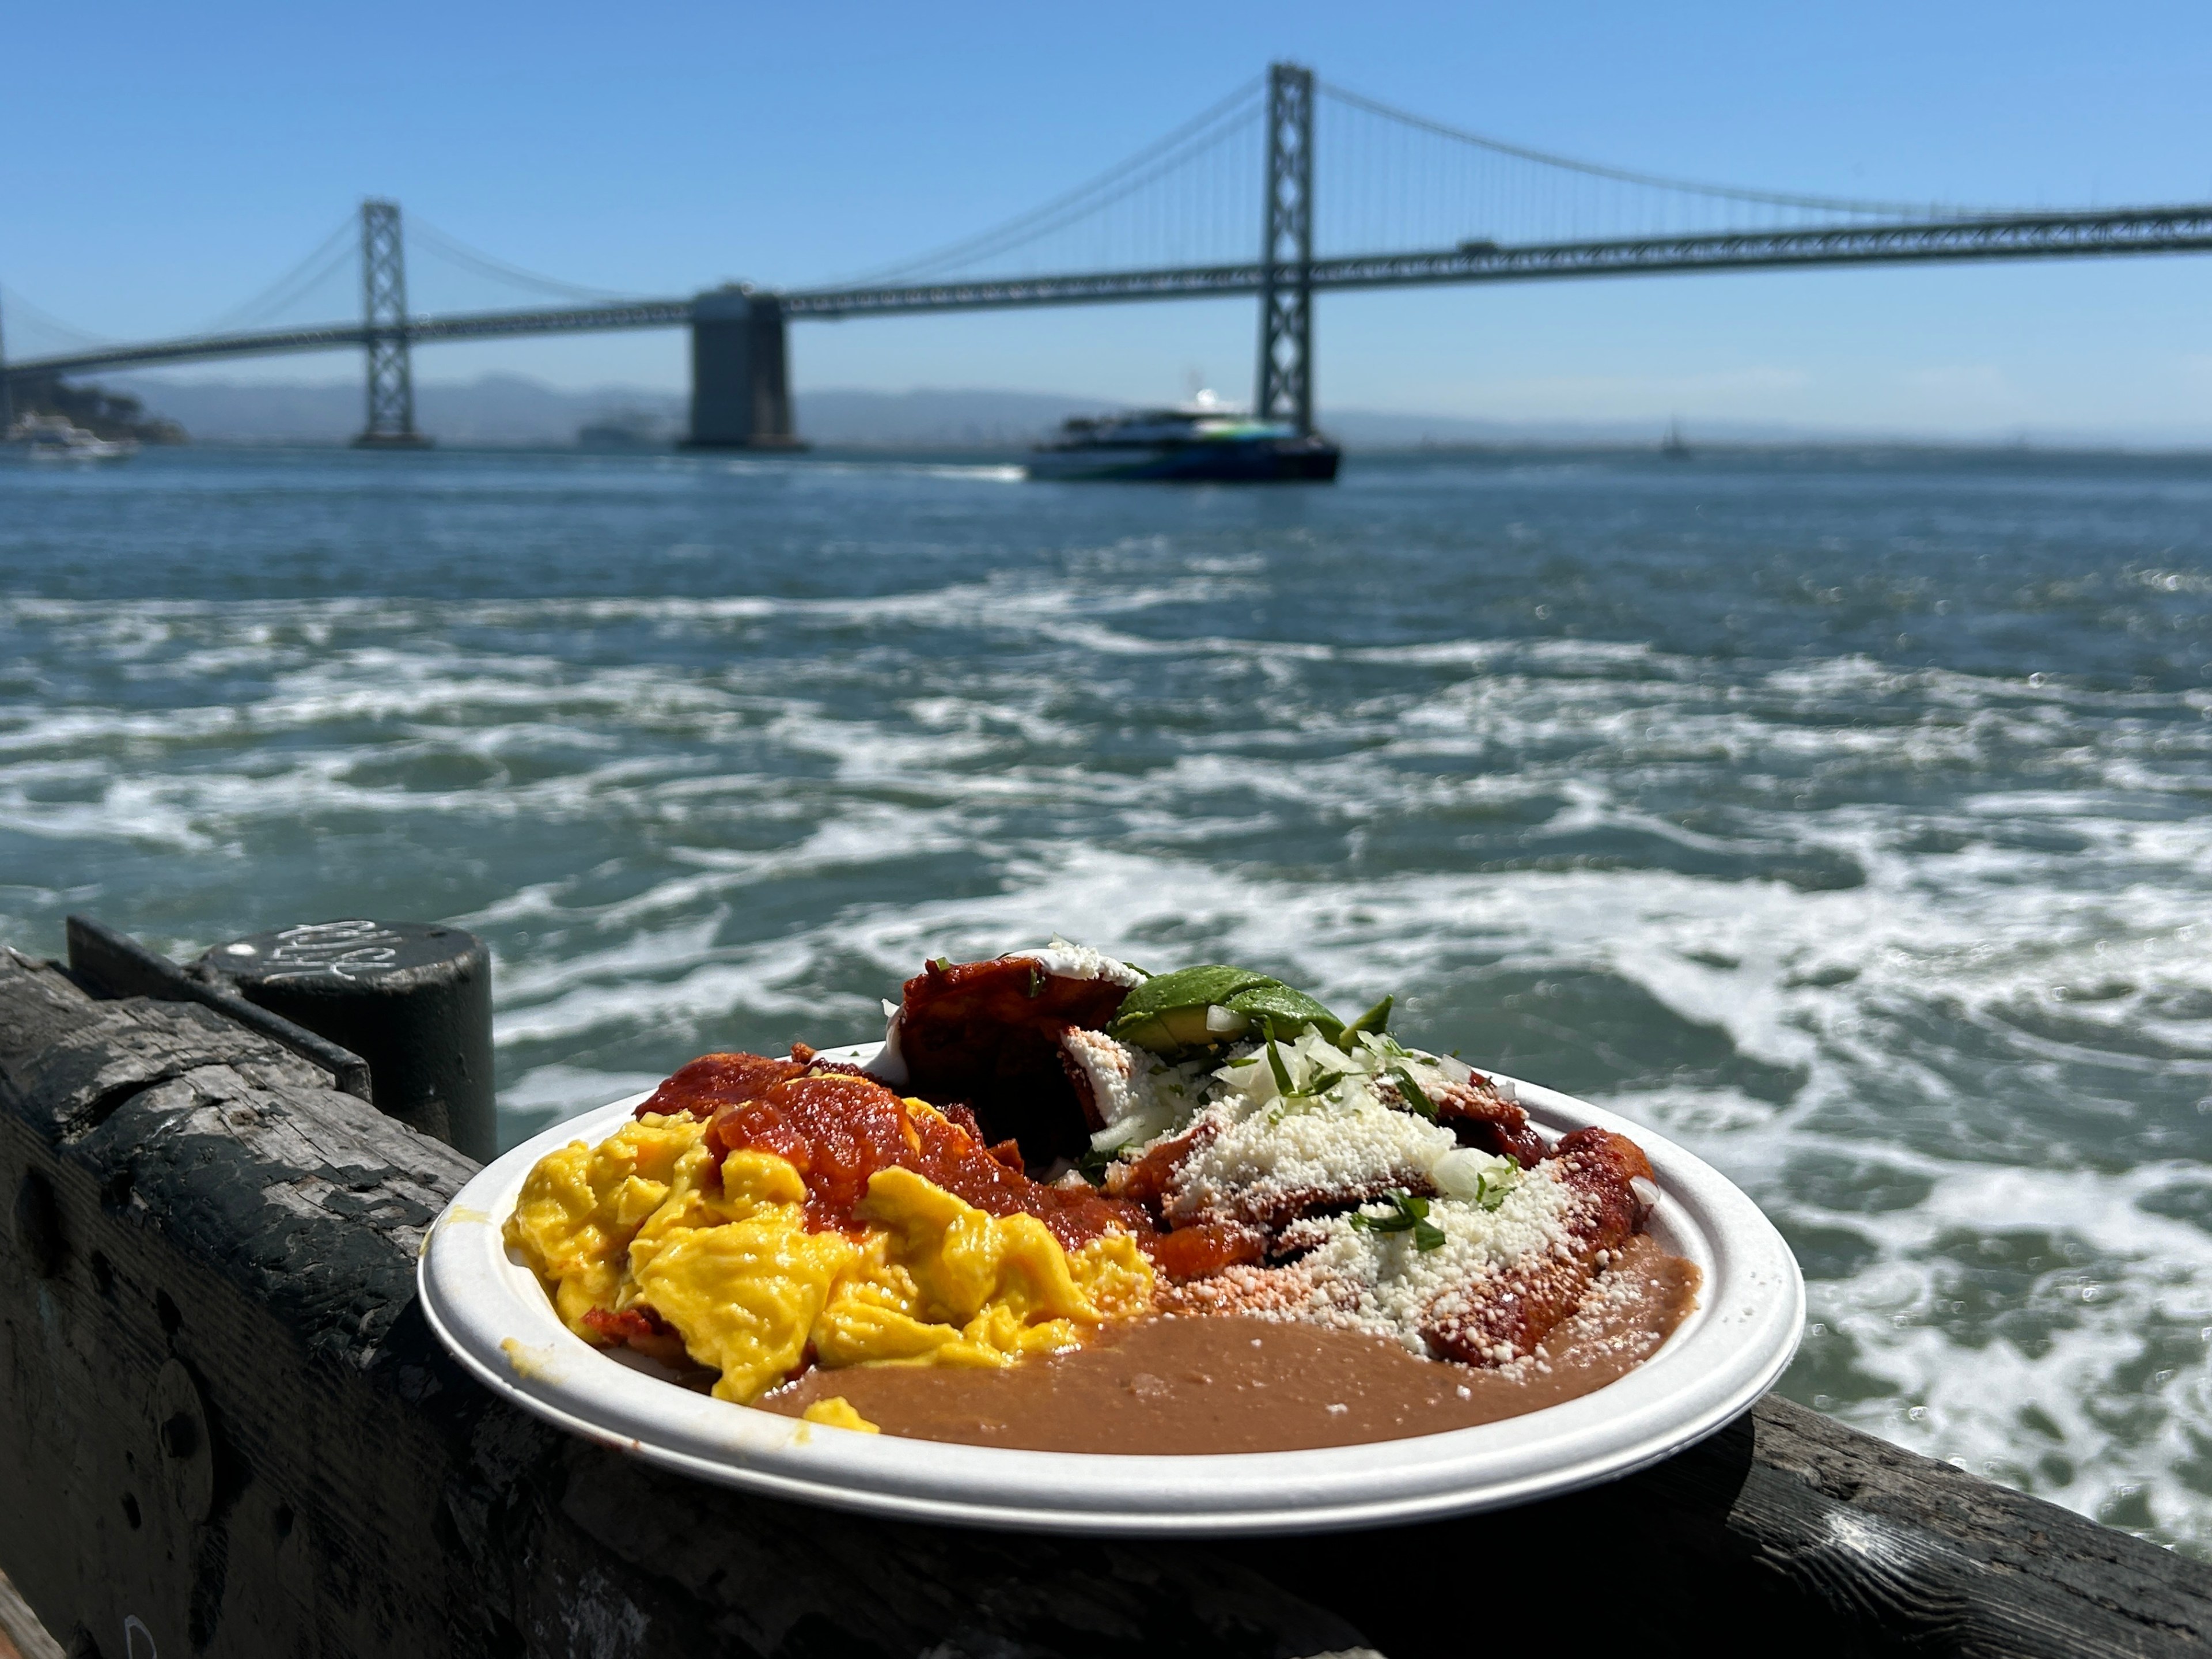 a plate of chilaquilles with eggs and refried beans sits on a rail at the waterfront with choppy SF Bay and the Bay Bridge visible